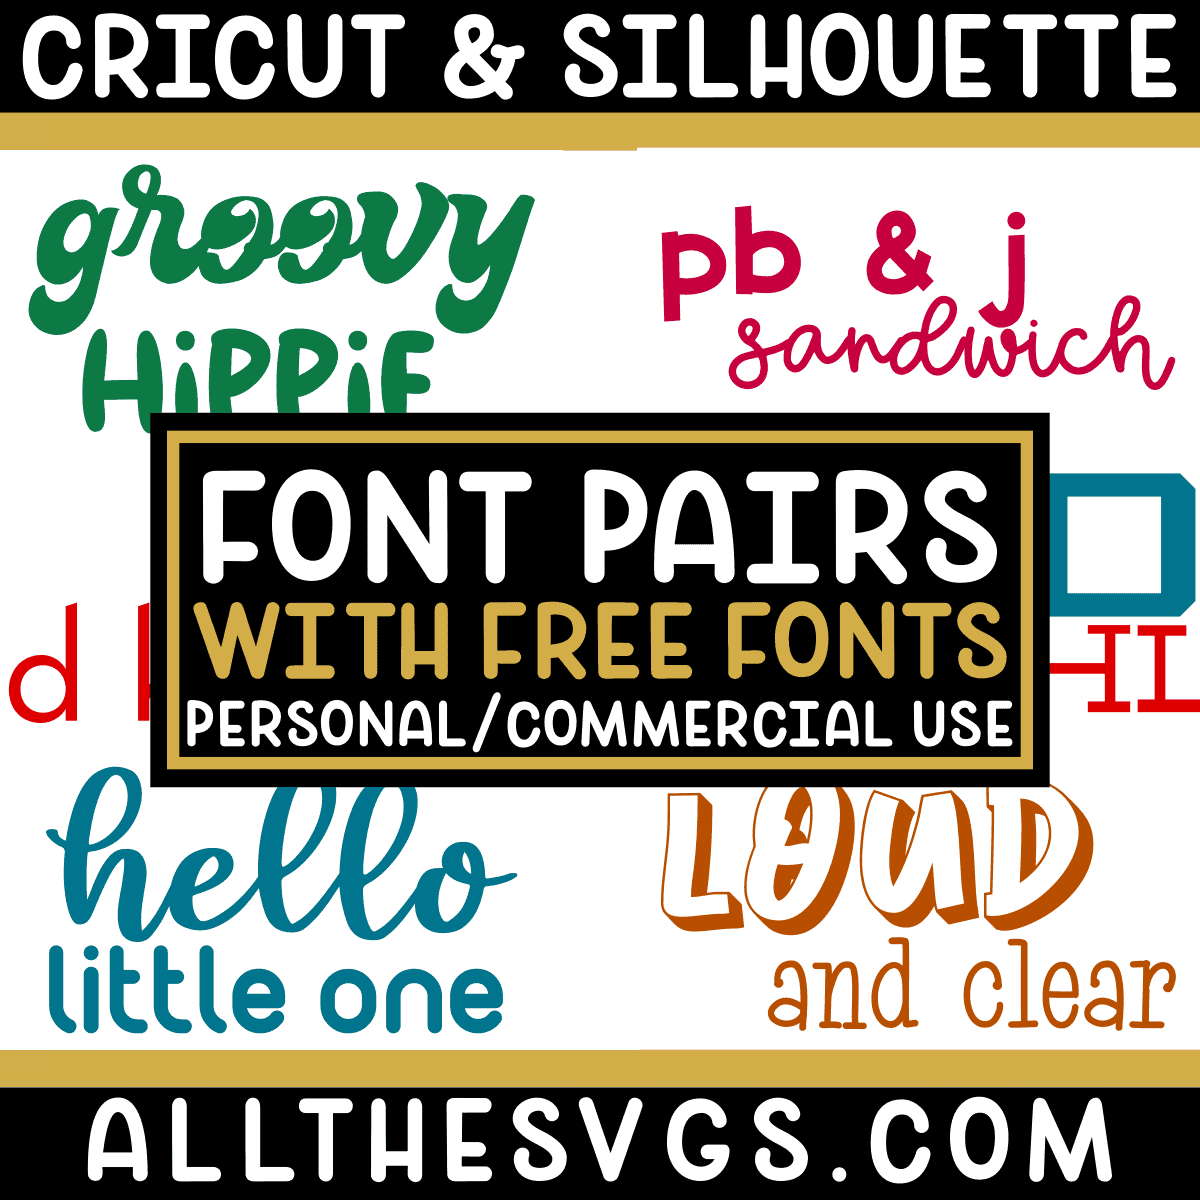 Graphic Bundles under $20 - Commercial Use Fonts & Graphics Freebies